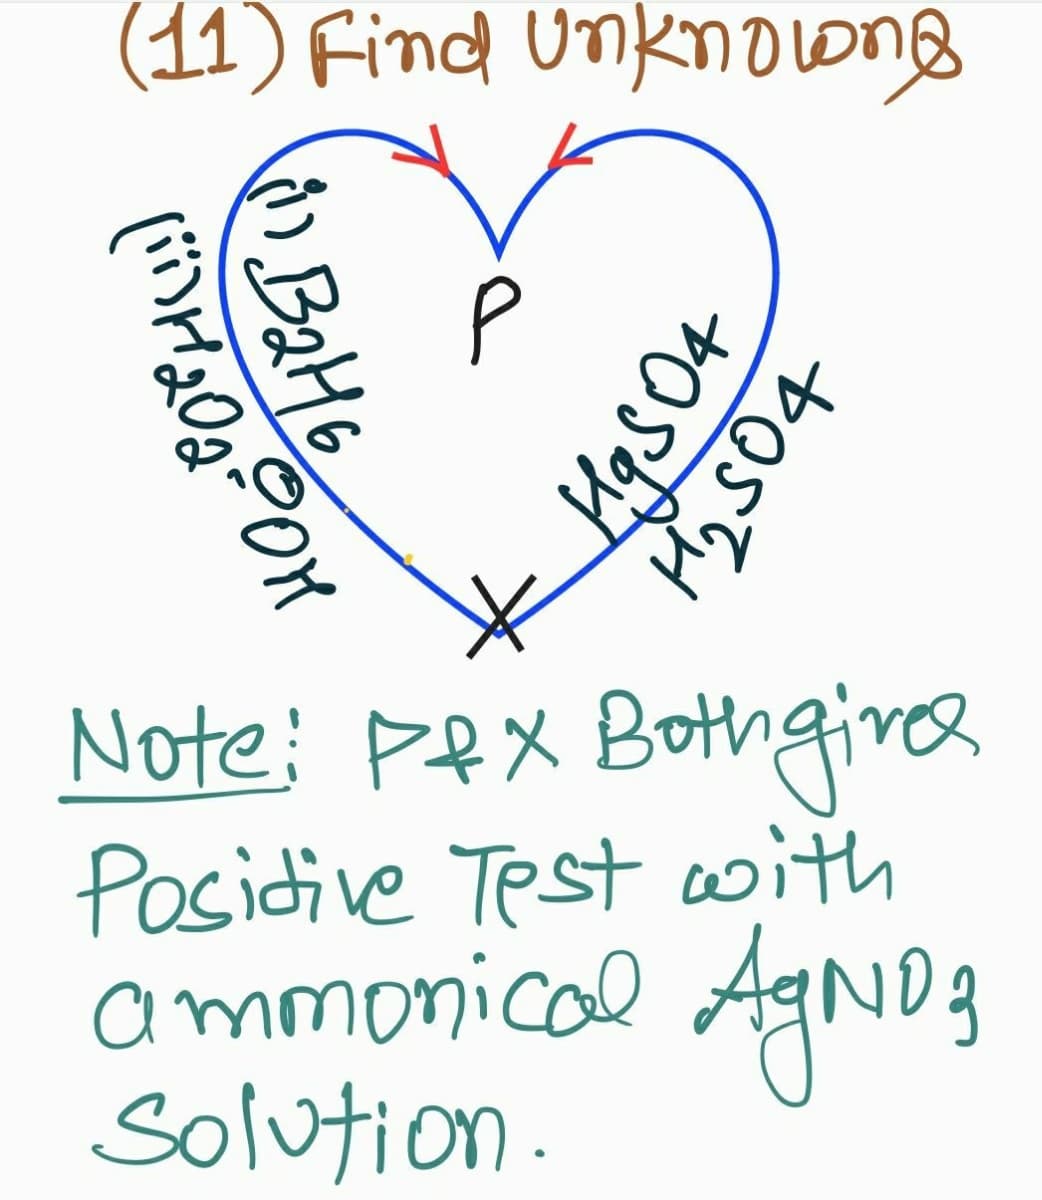 (11) Find Unknovong
P
Note: PfX Bothgive
Posidive Test with
ammonical AgNDa
Solution.
Hg S04
